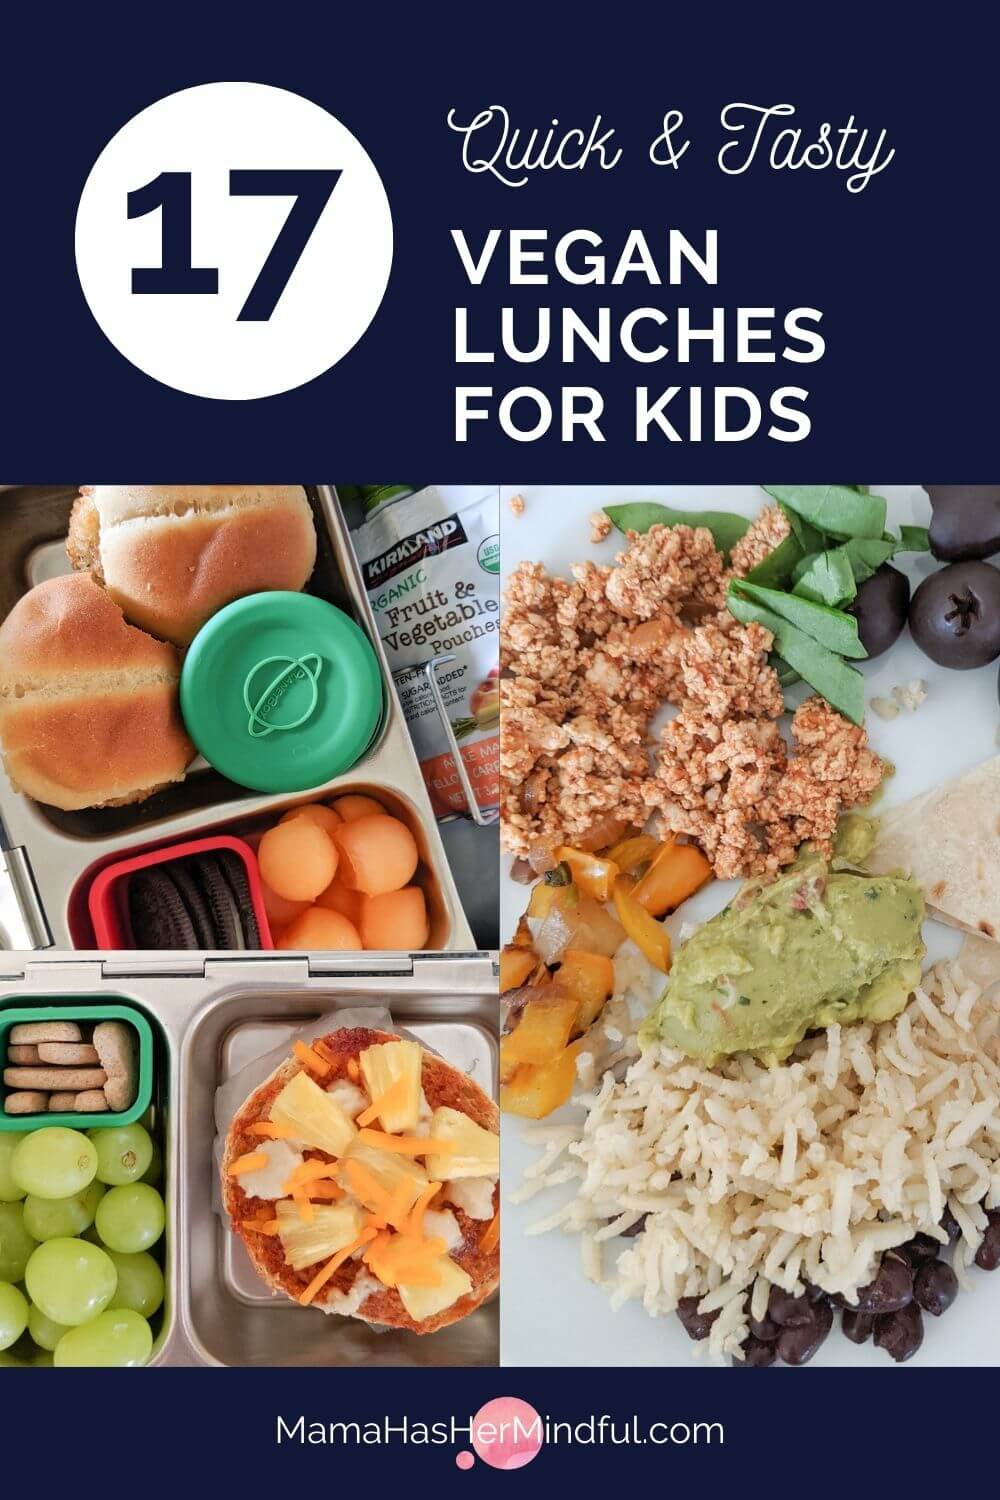 17 Quick & Tasty Vegan Lunches for Kids